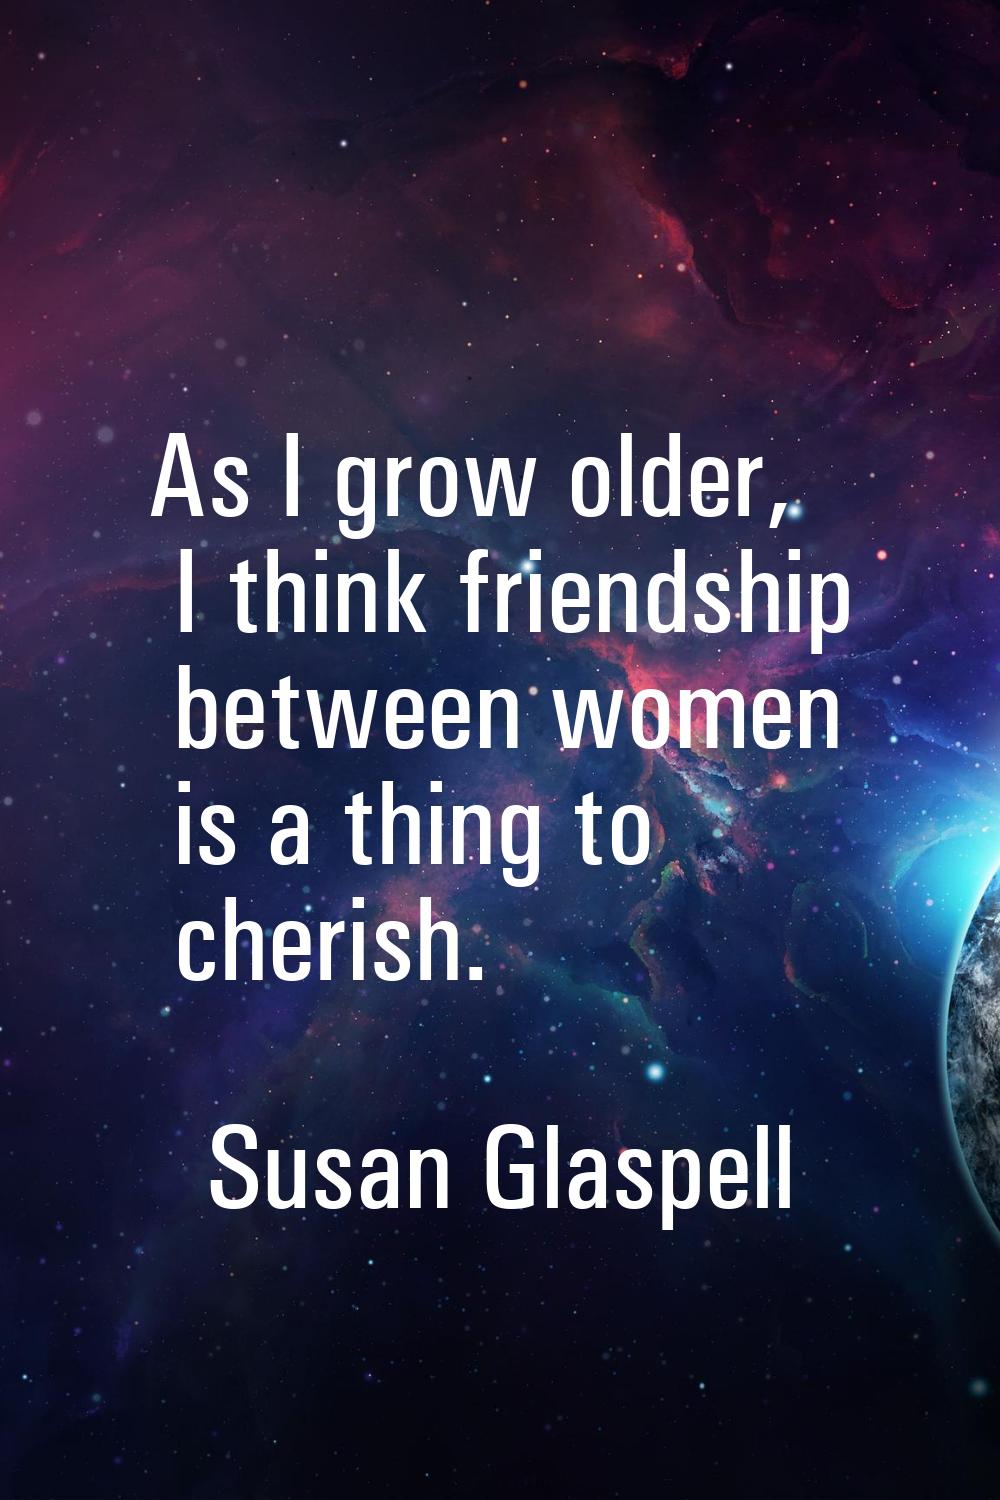 As I grow older, I think friendship between women is a thing to cherish.